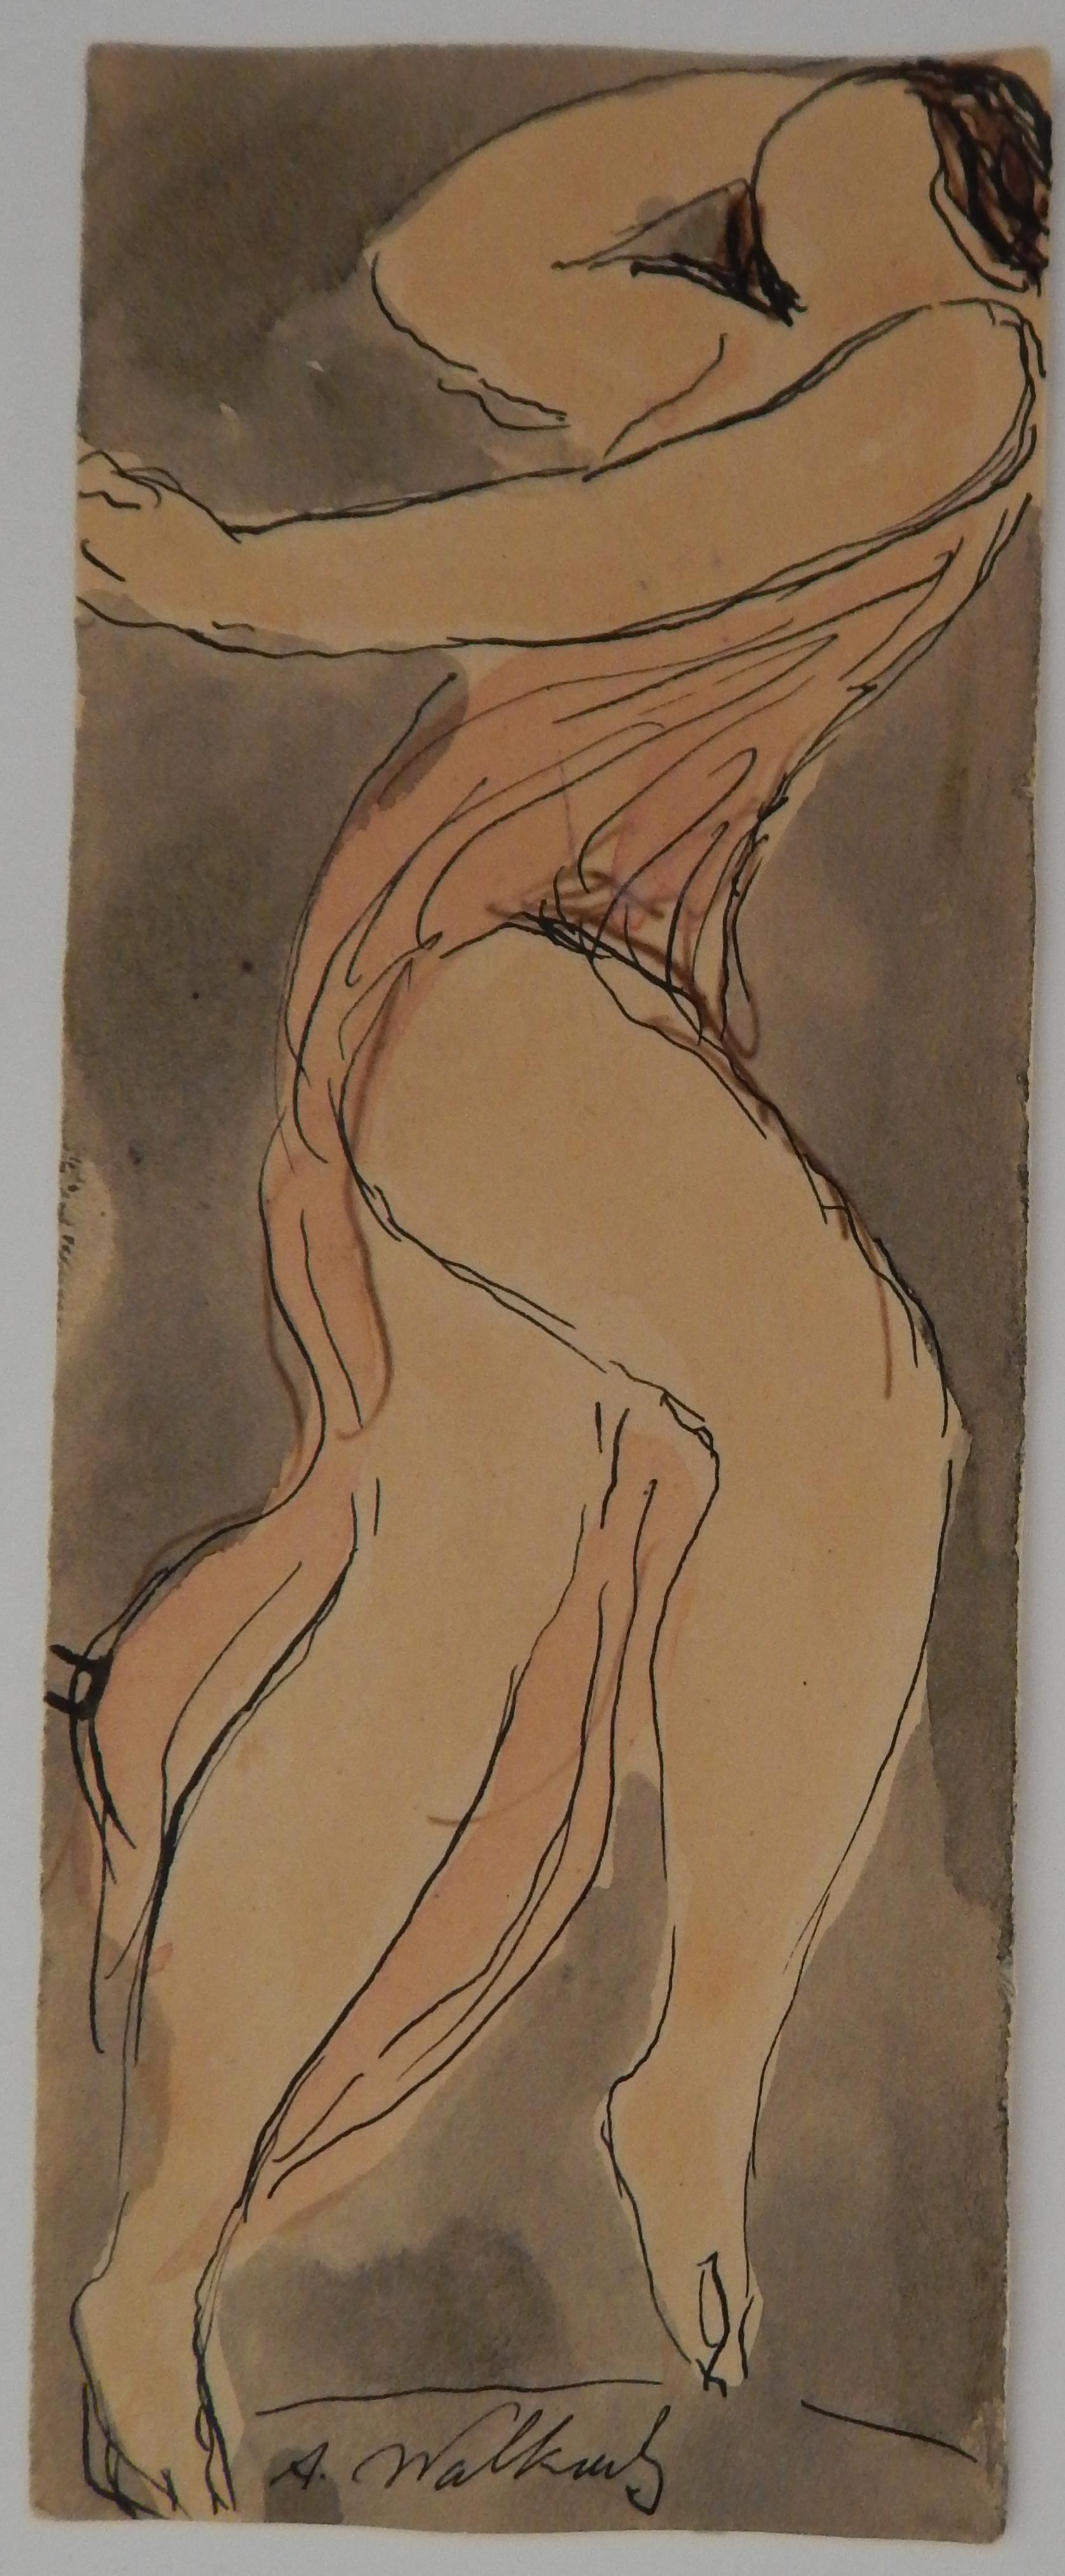 Original pen and ink with watercolor by American Modernist Abraham Walkowitz (1878-1965)
Depicting one of his favourite subjects, Isadora Duncan, the “Mother of Modern Dance.”
In excellent condition, circa 1920s. Signed in ink lower